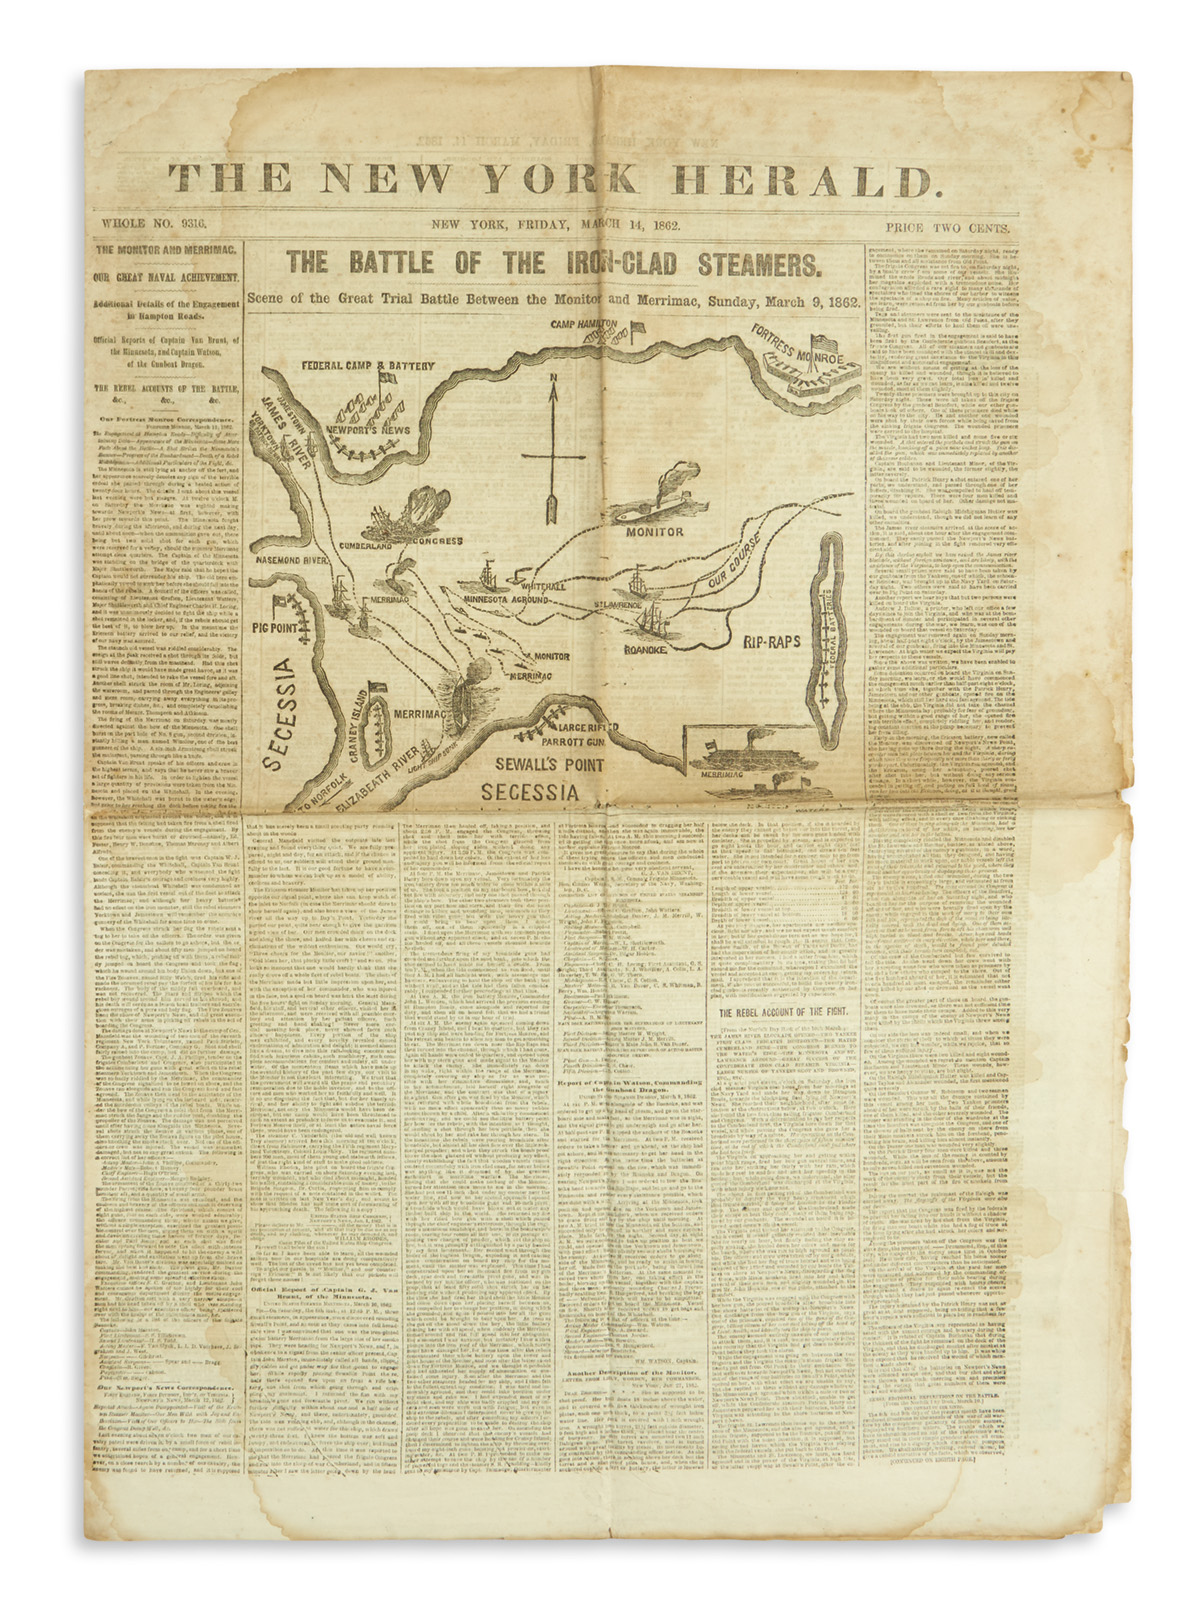 (CIVIL WAR.) Issue of the New York Herald featuring a large cover illustration of the Monitor and Merrimac.